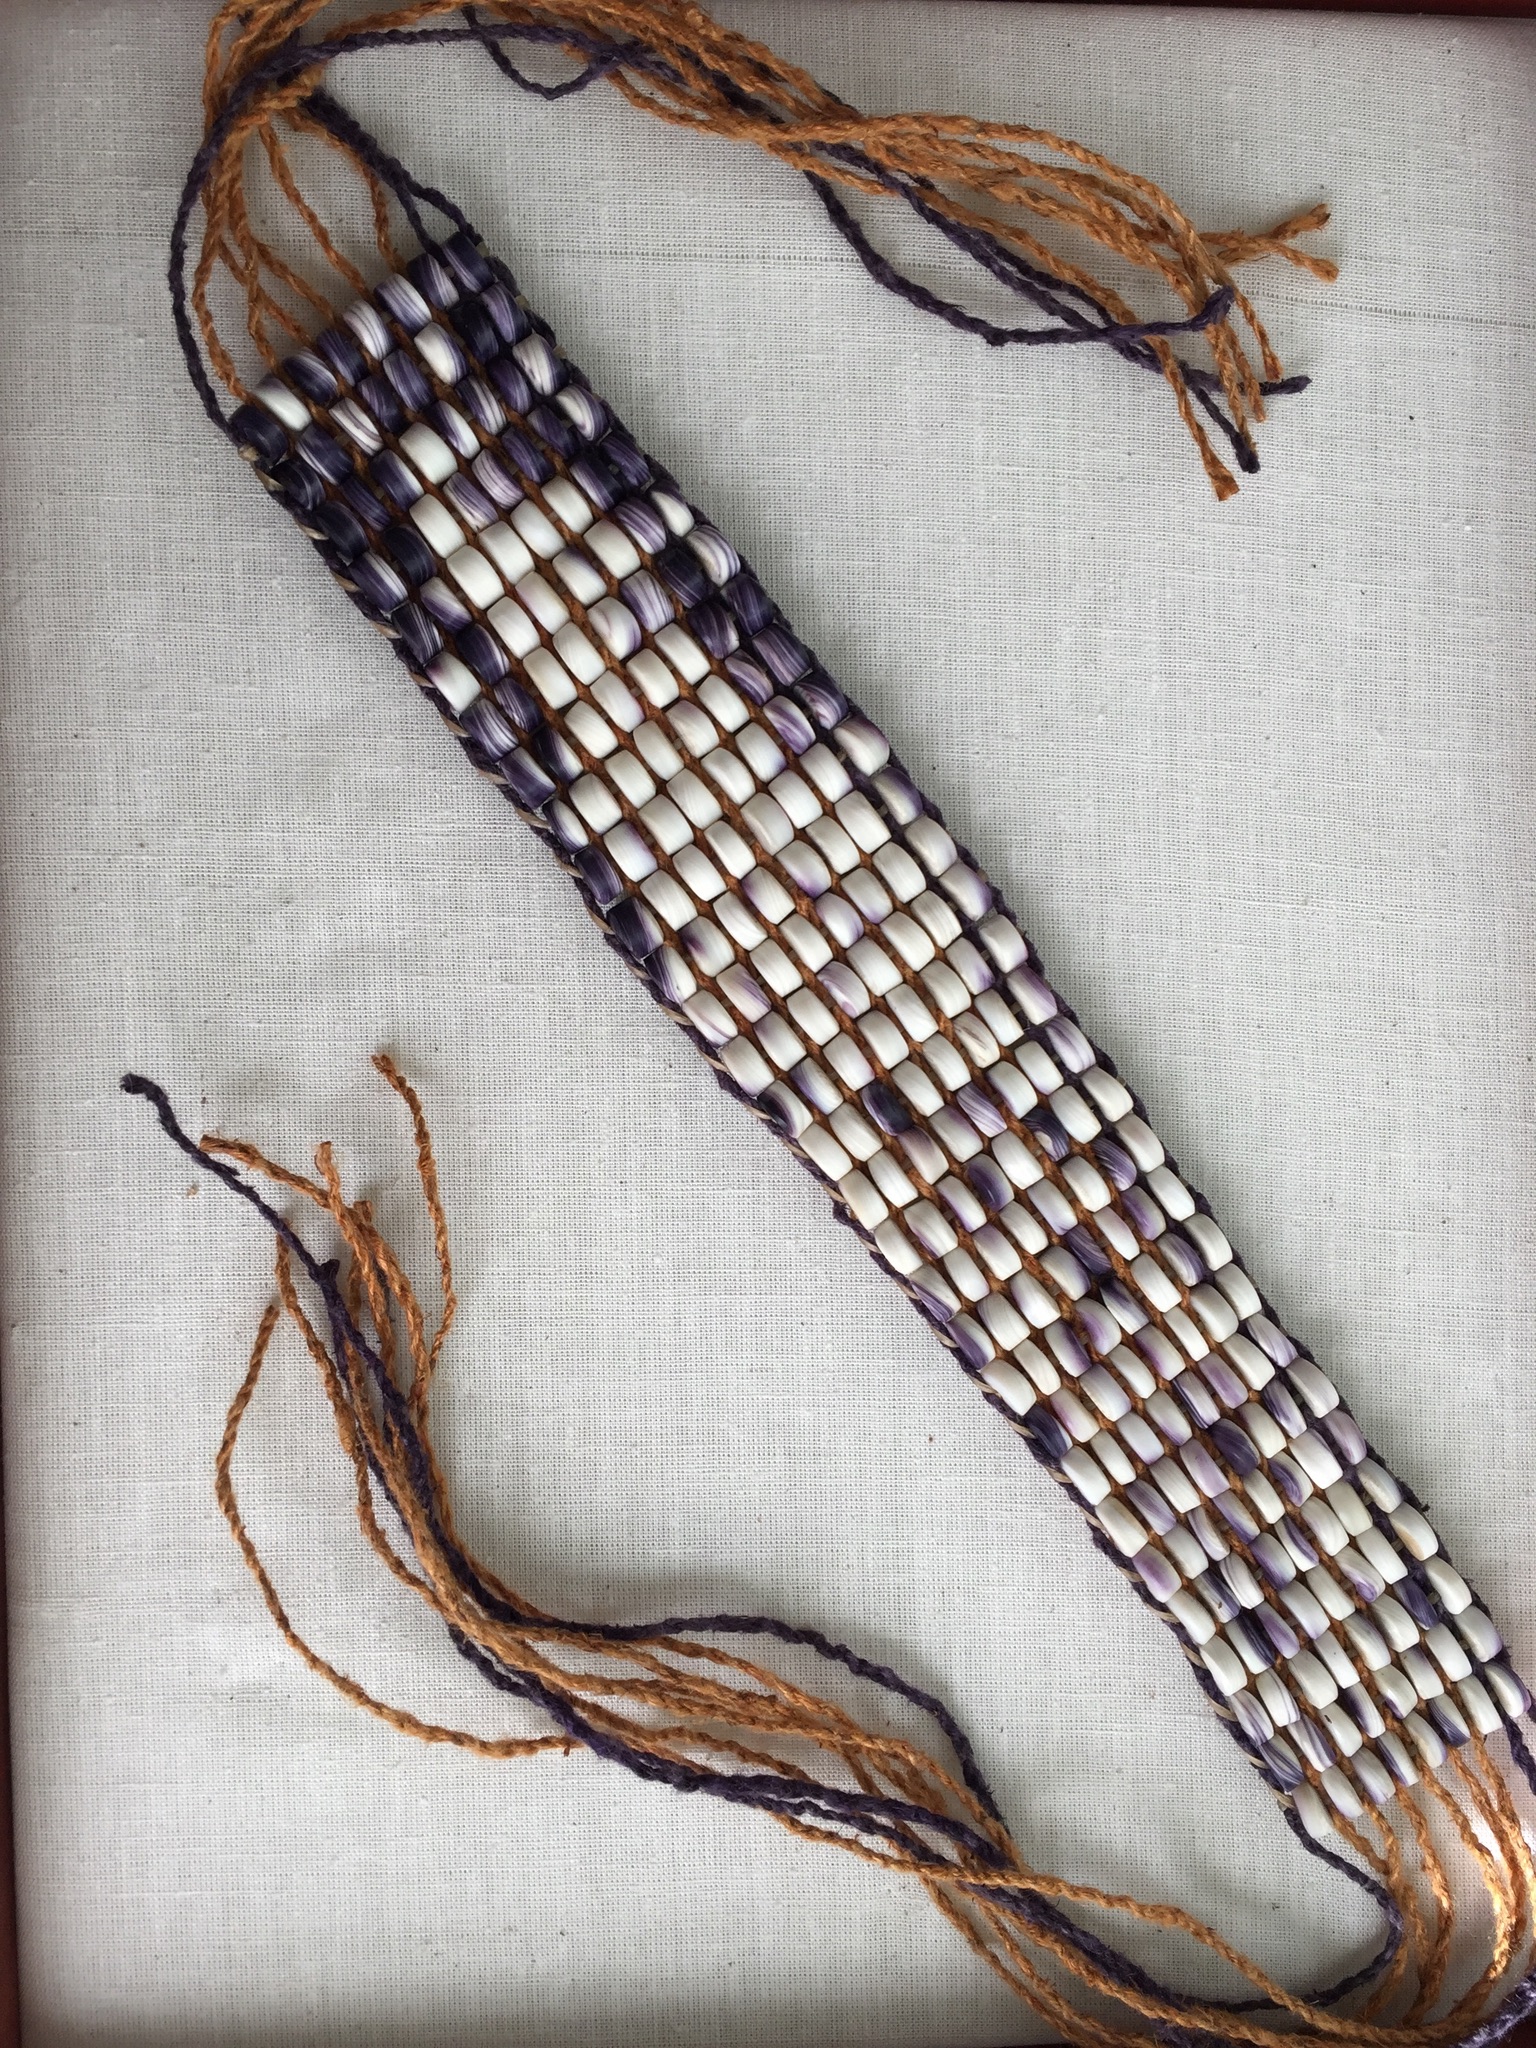 Color photograph of a beaded wampum belt with tasseled ties